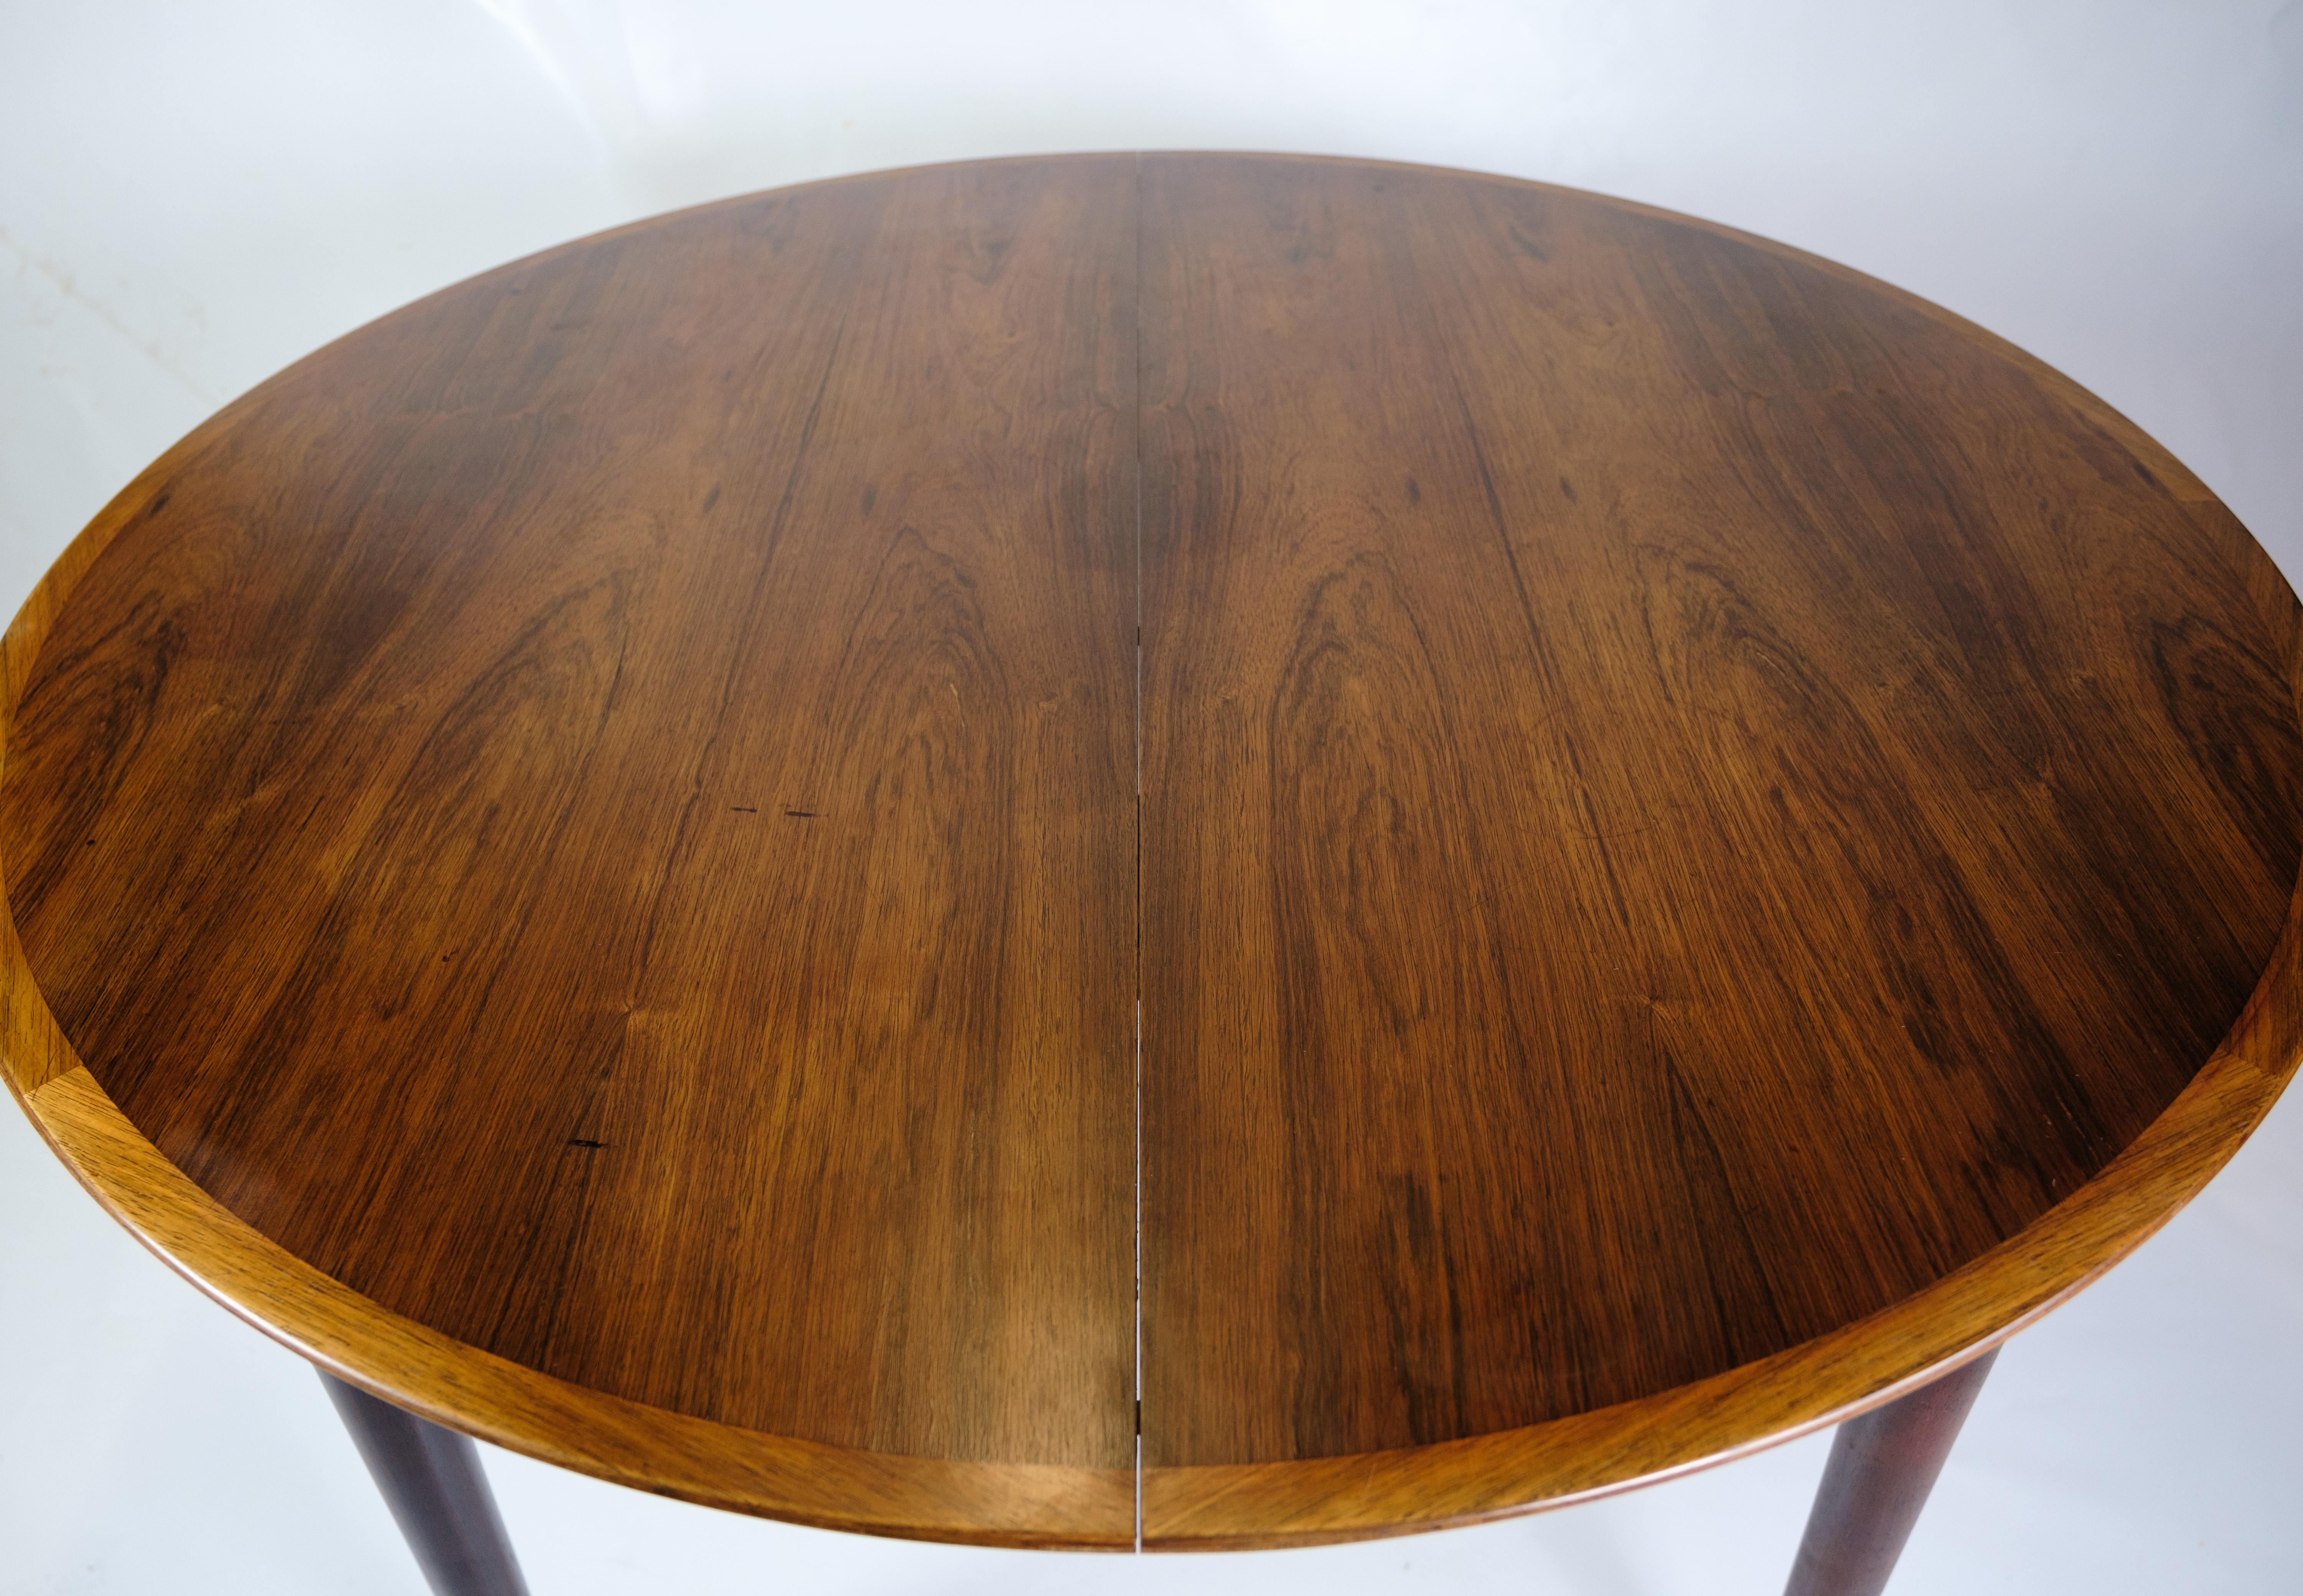 *PRICE INCLUDES FULL REFINISH OF THE ENTIRE ITEM*

This round rosewood dining table, designed by renowned Danish furniture designer Arne Vodder in the 1960s, represents an outstanding example of Scandinavian craftsmanship and design. Made from